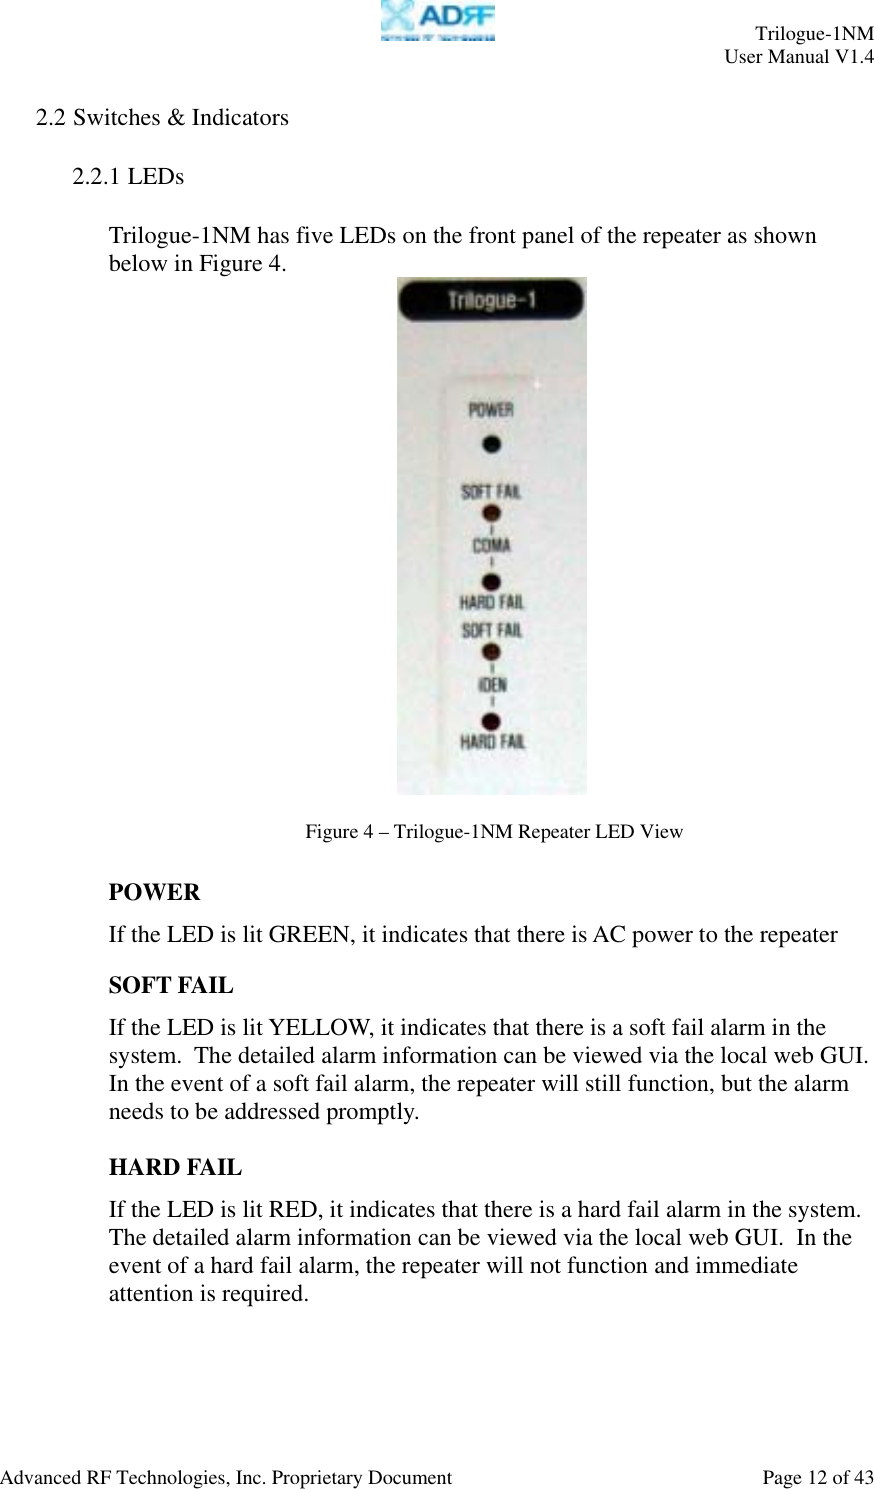     Trilogue-1NM User Manual V1.4  Advanced RF Technologies, Inc. Proprietary Document  Page 12 of 43  2.2 Switches &amp; Indicators  2.2.1 LEDs  Trilogue-1NM has five LEDs on the front panel of the repeater as shown below in Figure 4.    POWER If the LED is lit GREEN, it indicates that there is AC power to the repeater  SOFT FAIL If the LED is lit YELLOW, it indicates that there is a soft fail alarm in the system.  The detailed alarm information can be viewed via the local web GUI.  In the event of a soft fail alarm, the repeater will still function, but the alarm needs to be addressed promptly.  HARD FAIL If the LED is lit RED, it indicates that there is a hard fail alarm in the system.  The detailed alarm information can be viewed via the local web GUI.  In the event of a hard fail alarm, the repeater will not function and immediate attention is required.   Figure 4 – Trilogue-1NM Repeater LED View 